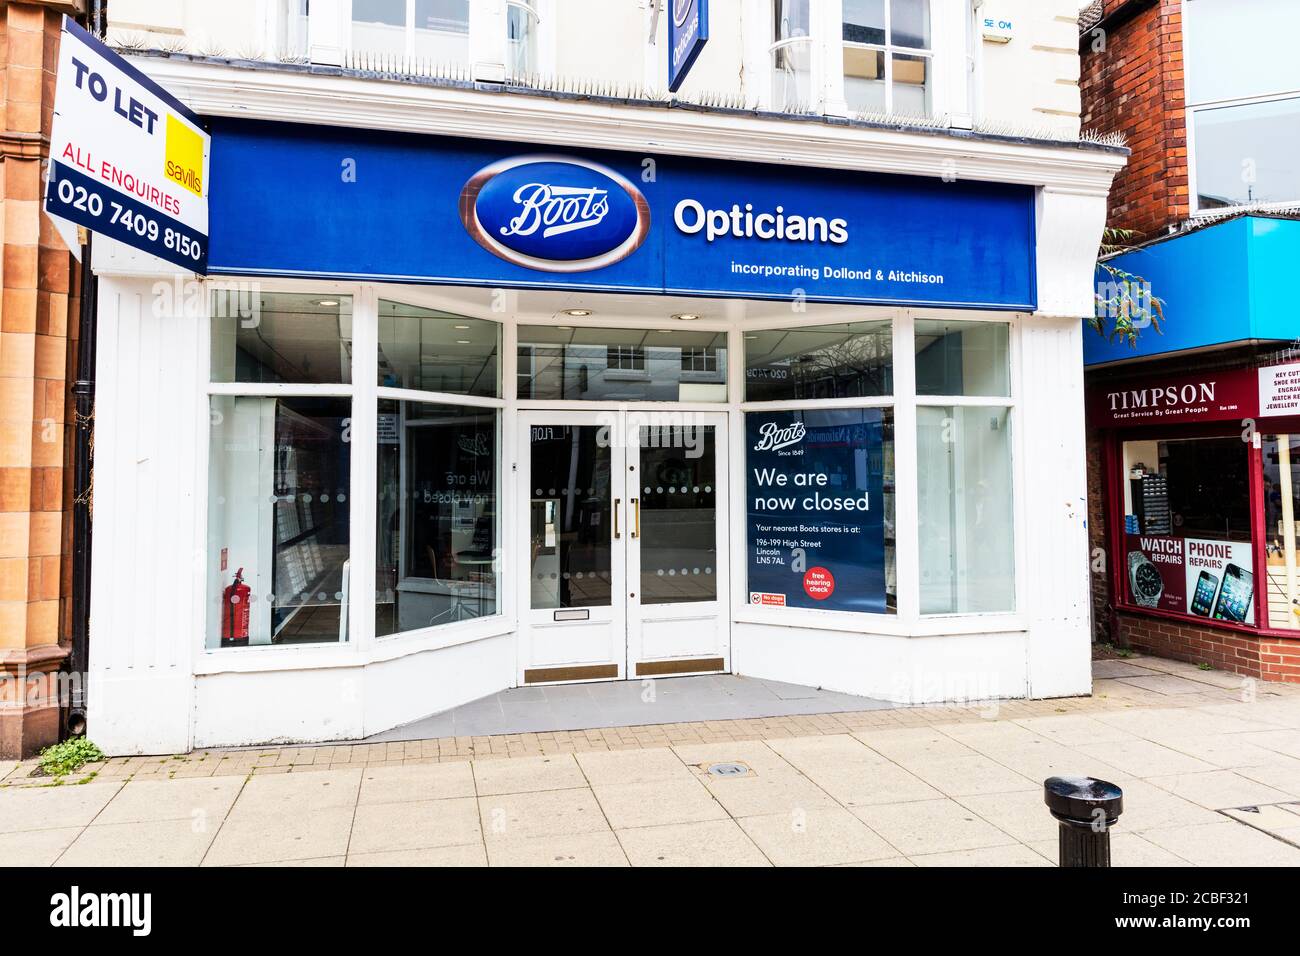 Boots opticians closed due to Covid 19, shop closed due to Covid 19, closed due to Covid 19, shop shut down due to Covid 19, closed, covid19, covid 19 Stock Photo